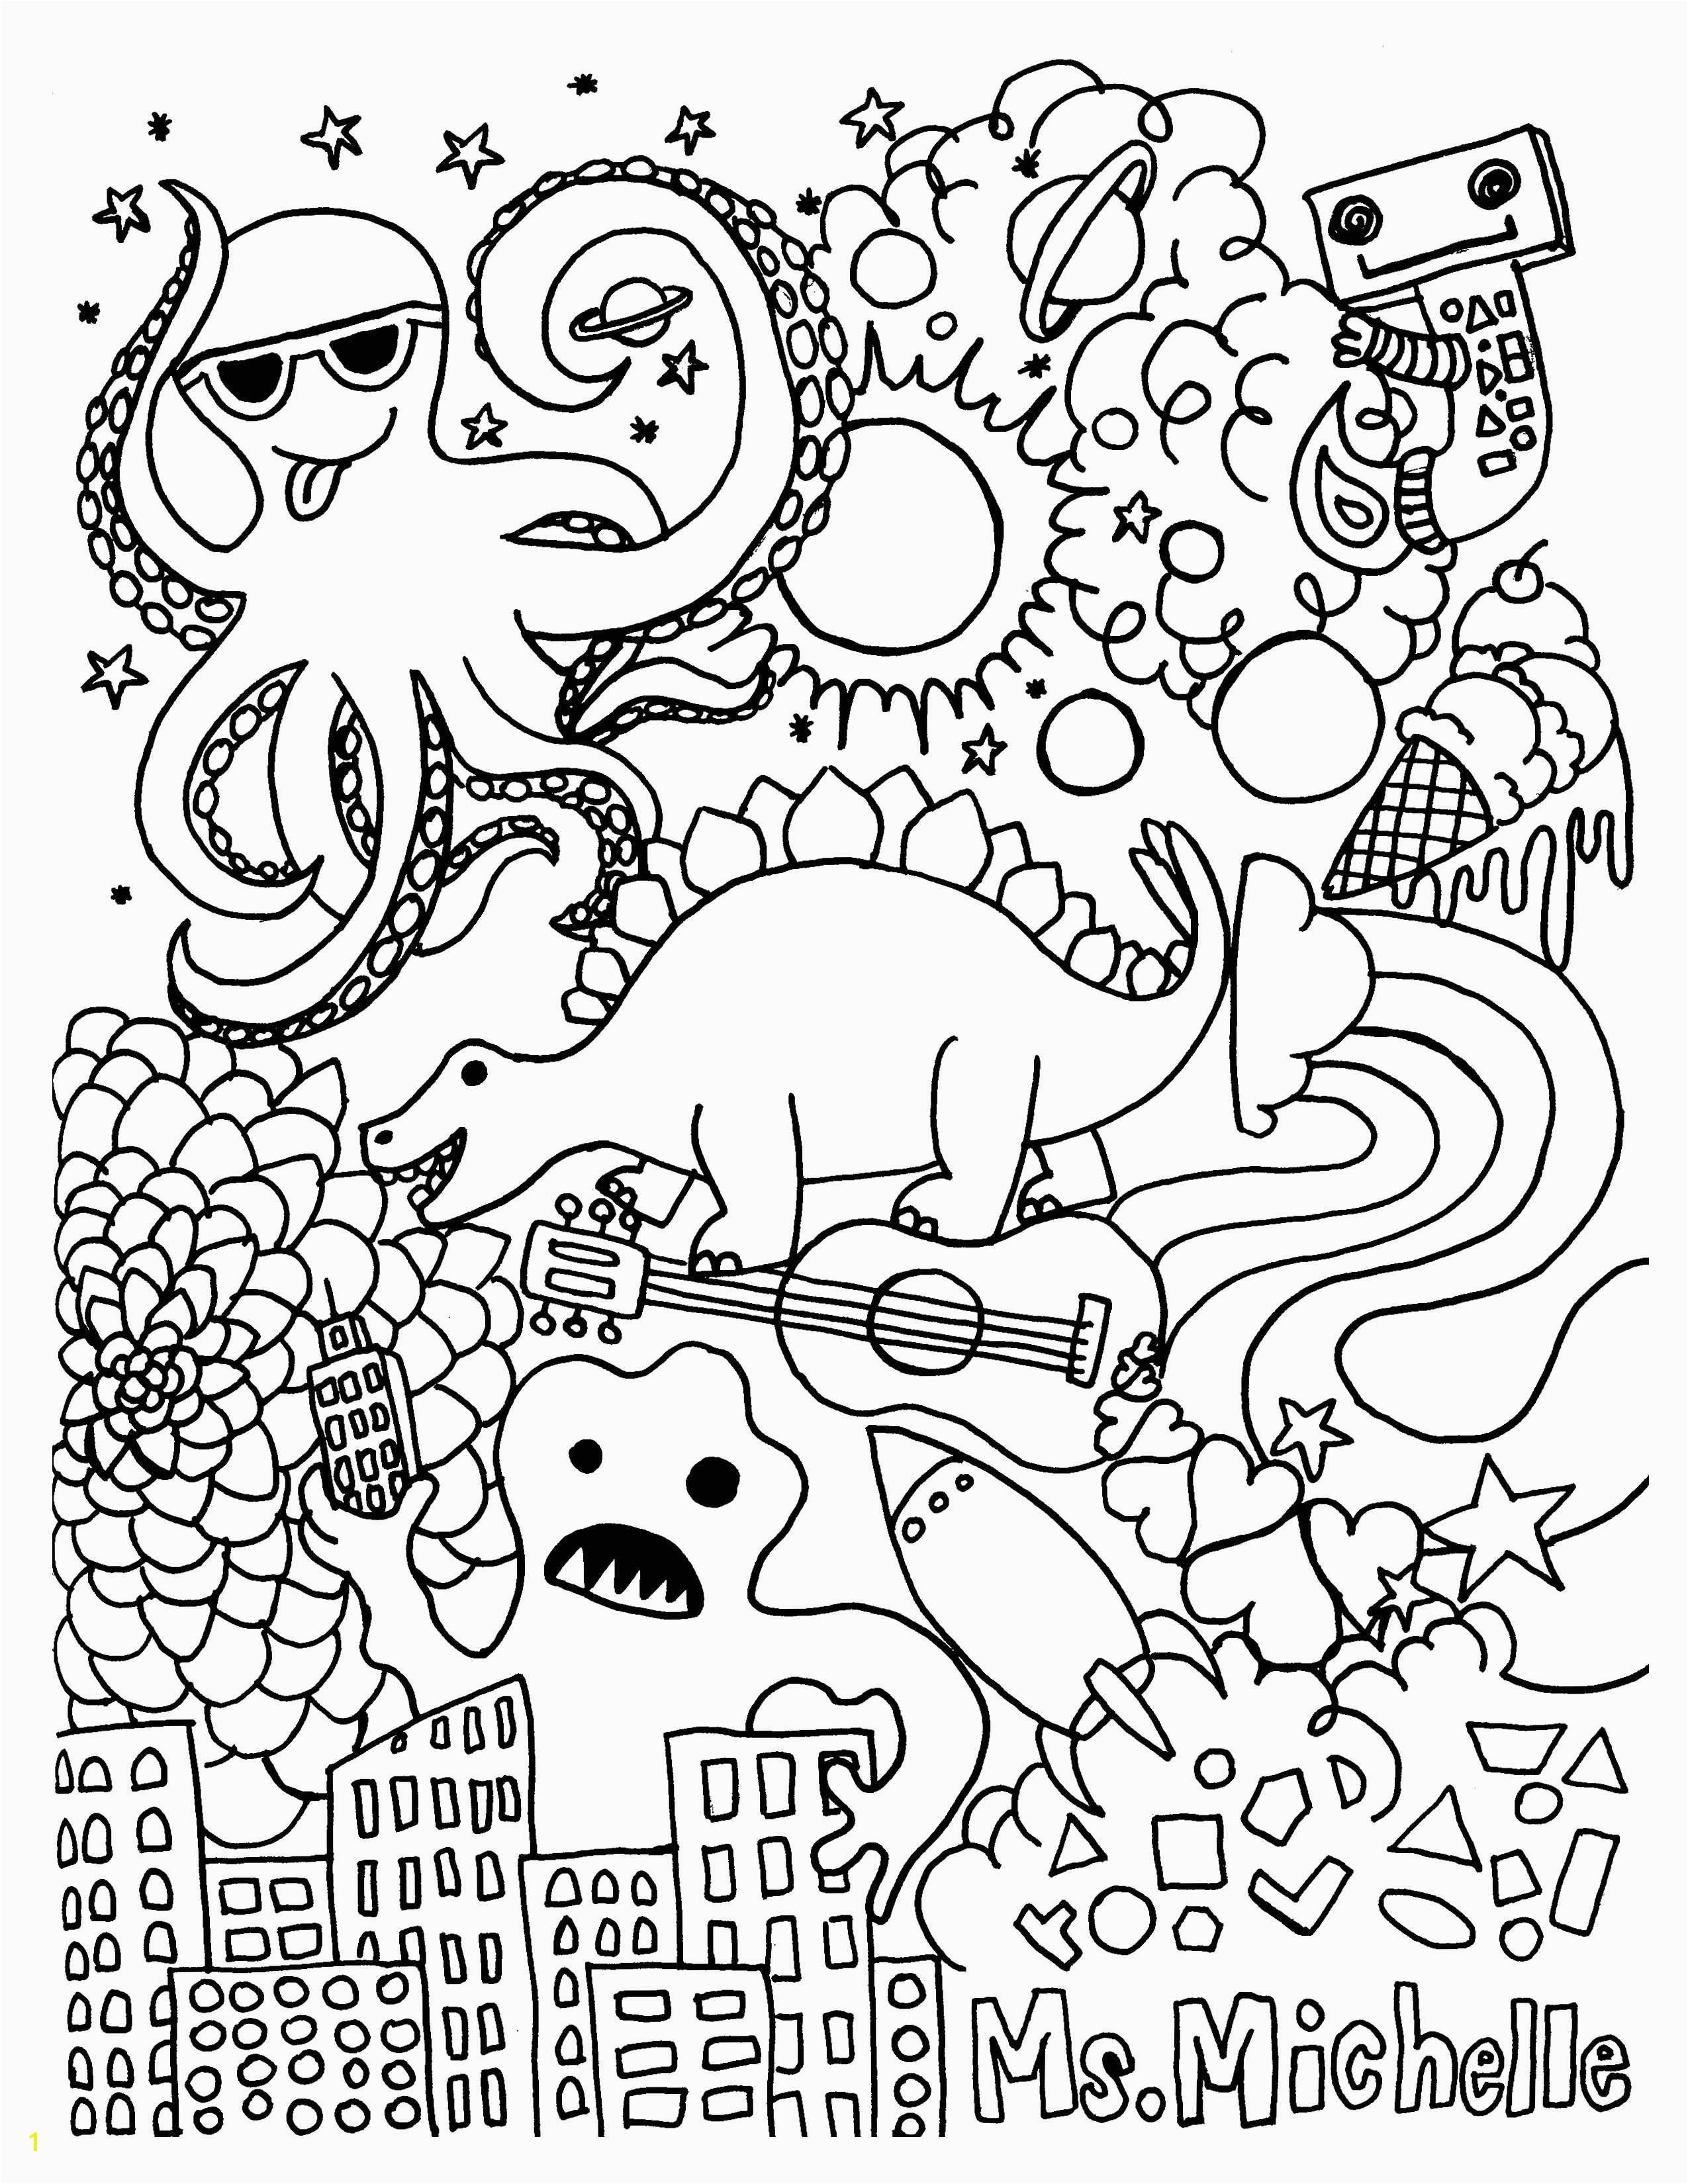 Coloring Pages Abc 123 2018 Free Coloring Pages for Halloween Unique Best Coloring Page Adult Od